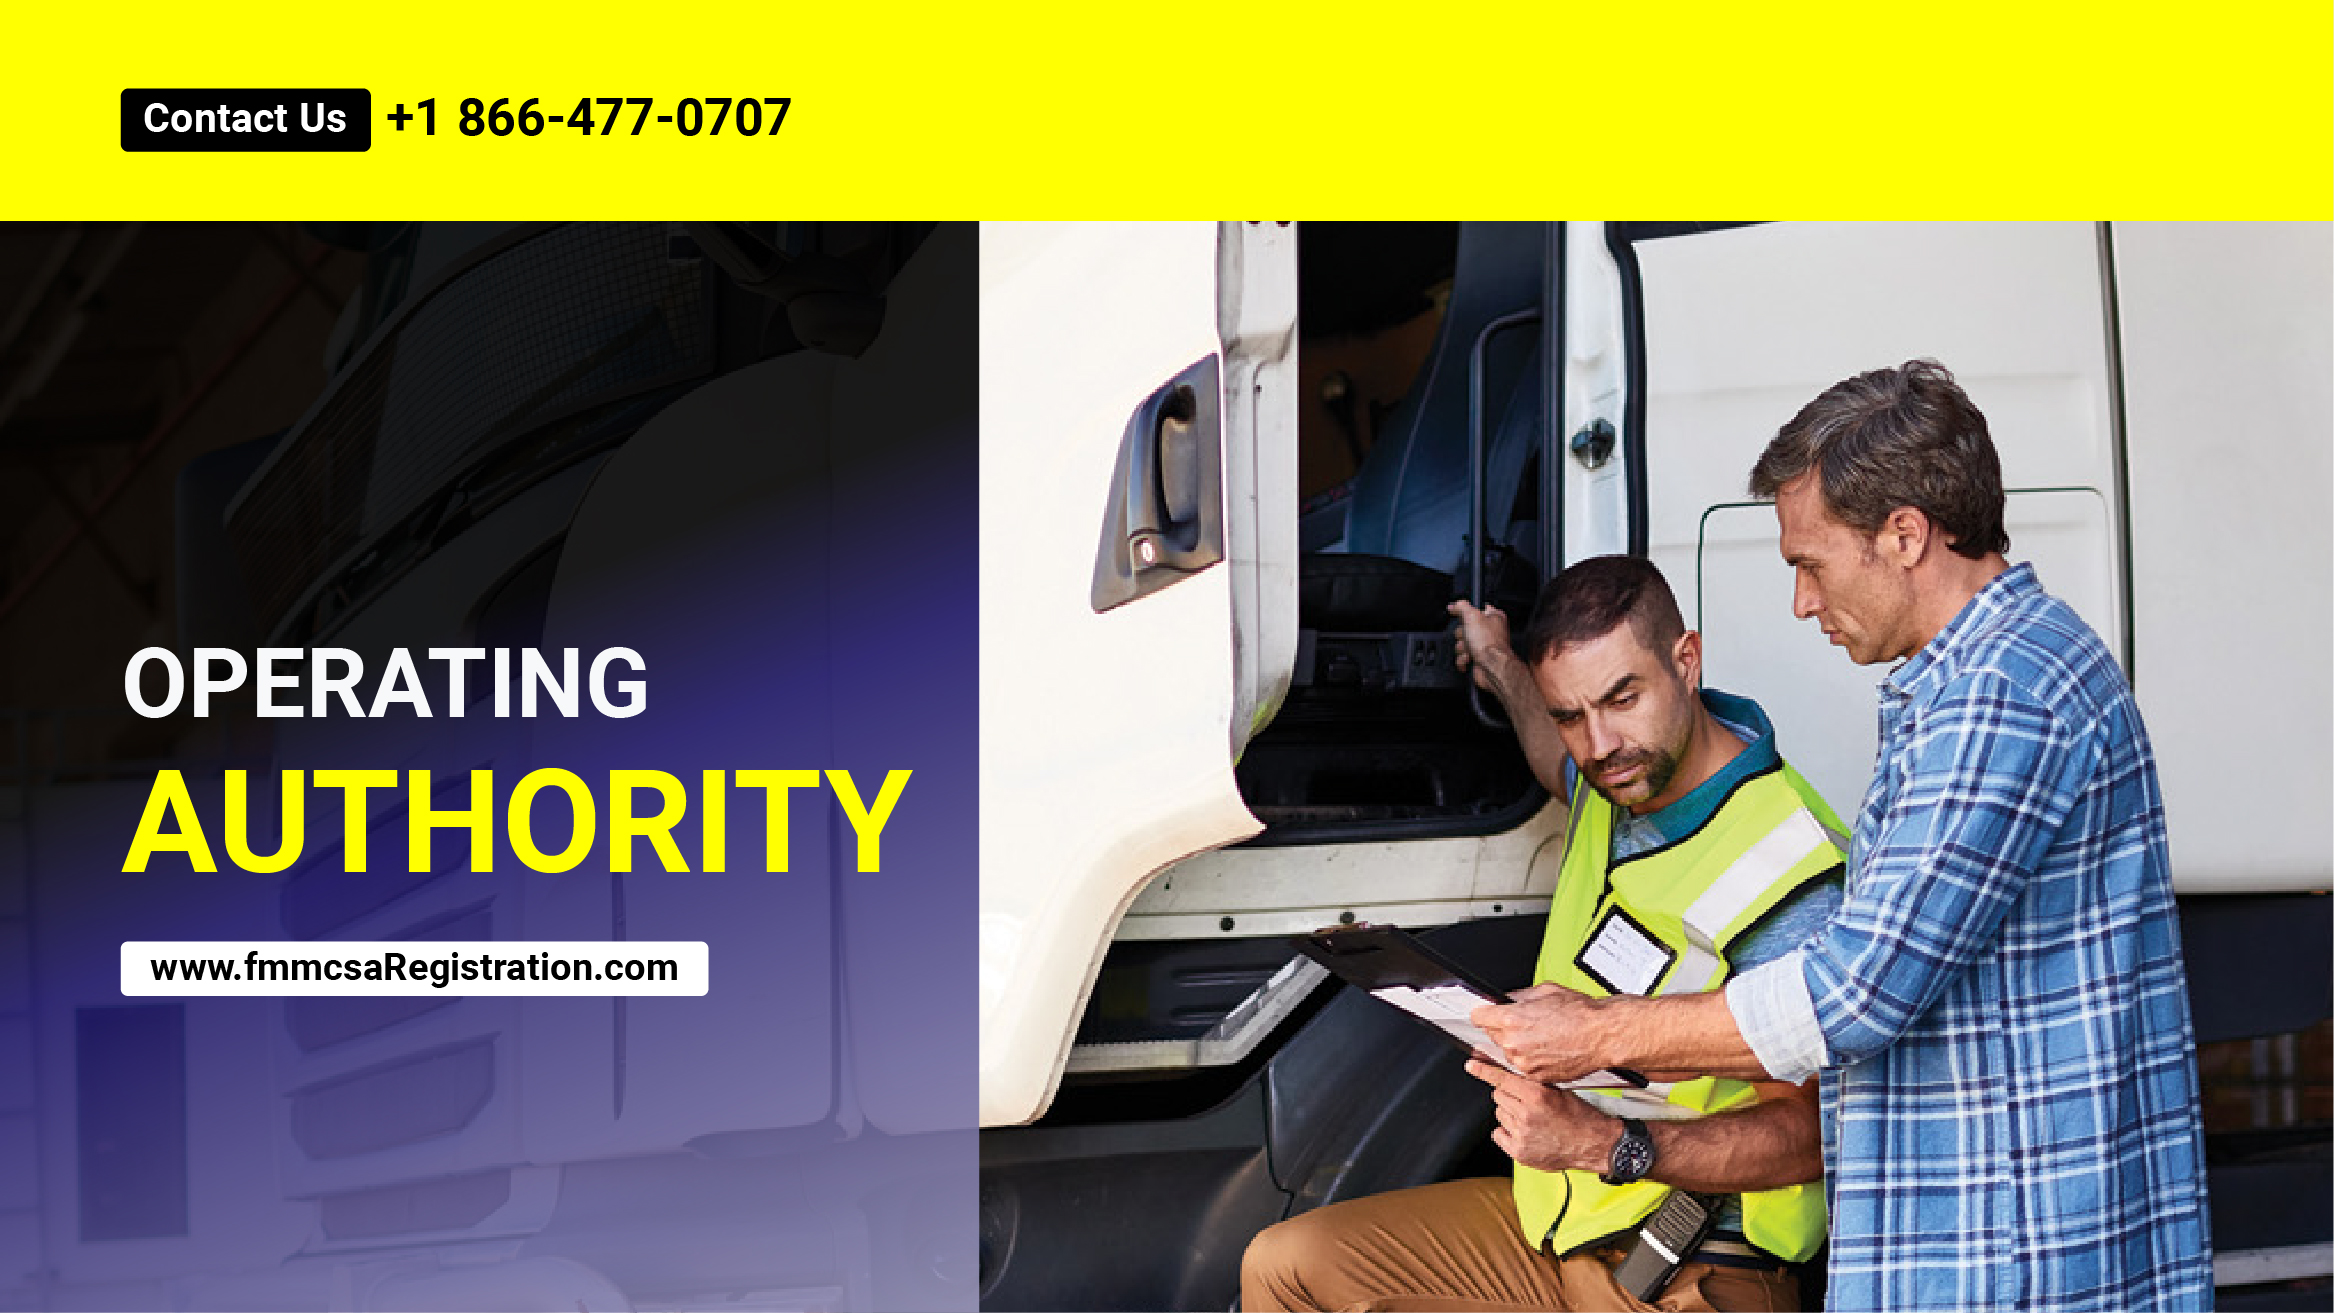 Operating Authority is qualification of FMCSA dot number to classify you